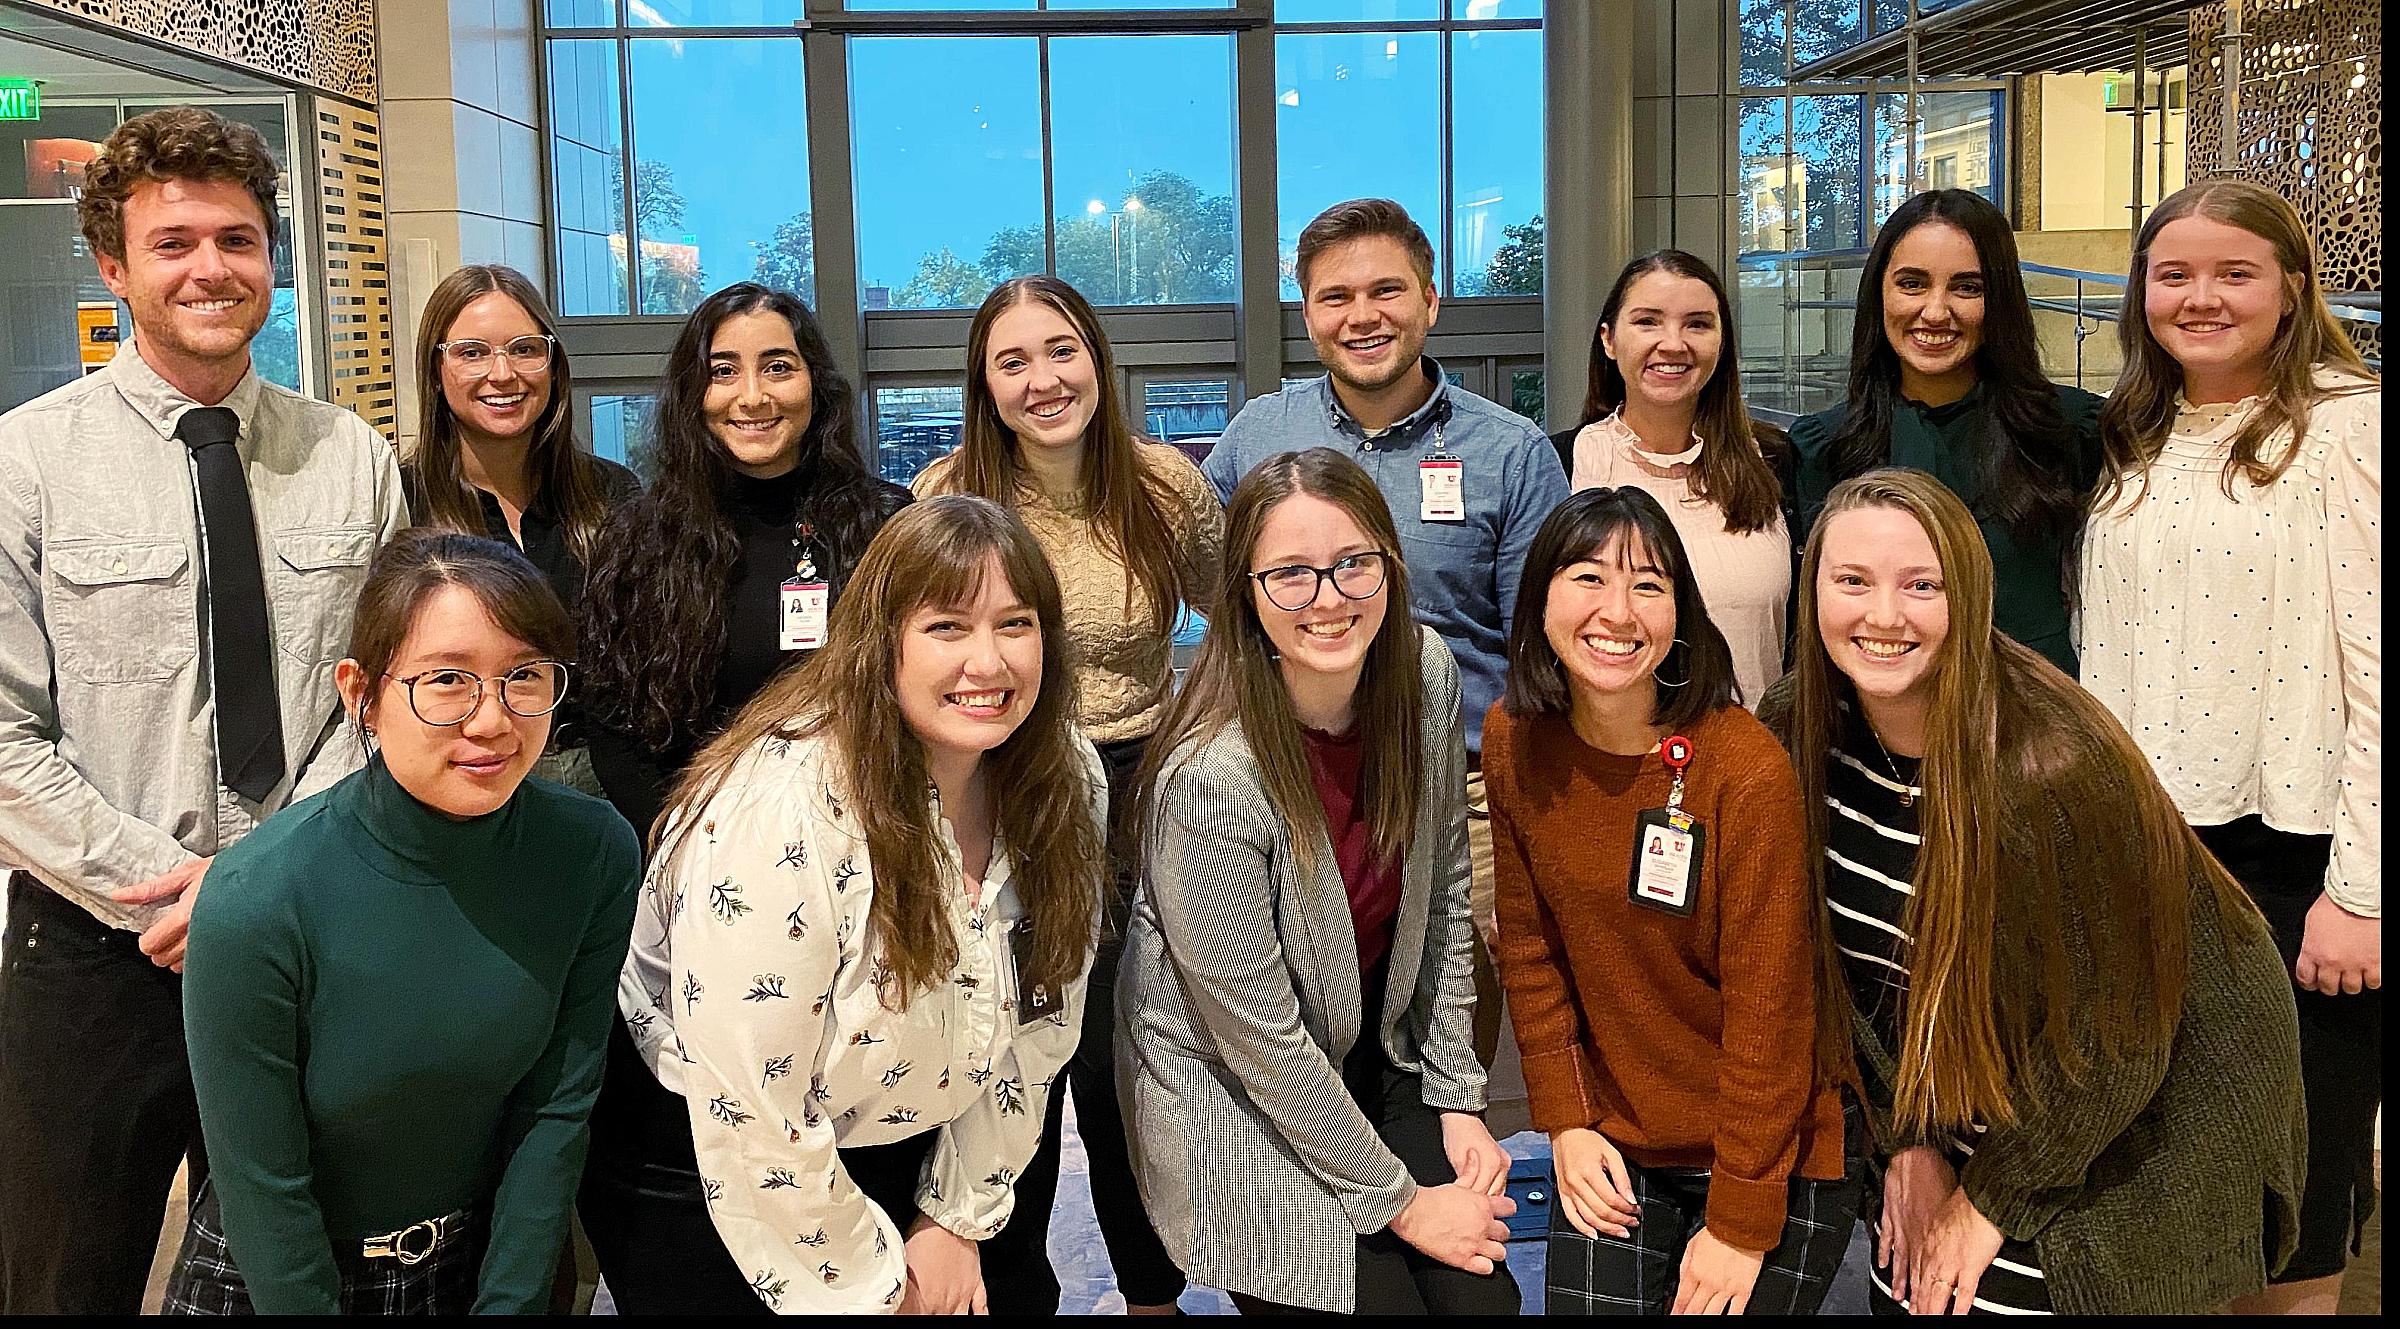 Rho Chi Pharmacy Honor Society inductees pose for a photo in the University of Utah College of Pharmacy atrium, October 26, 2022